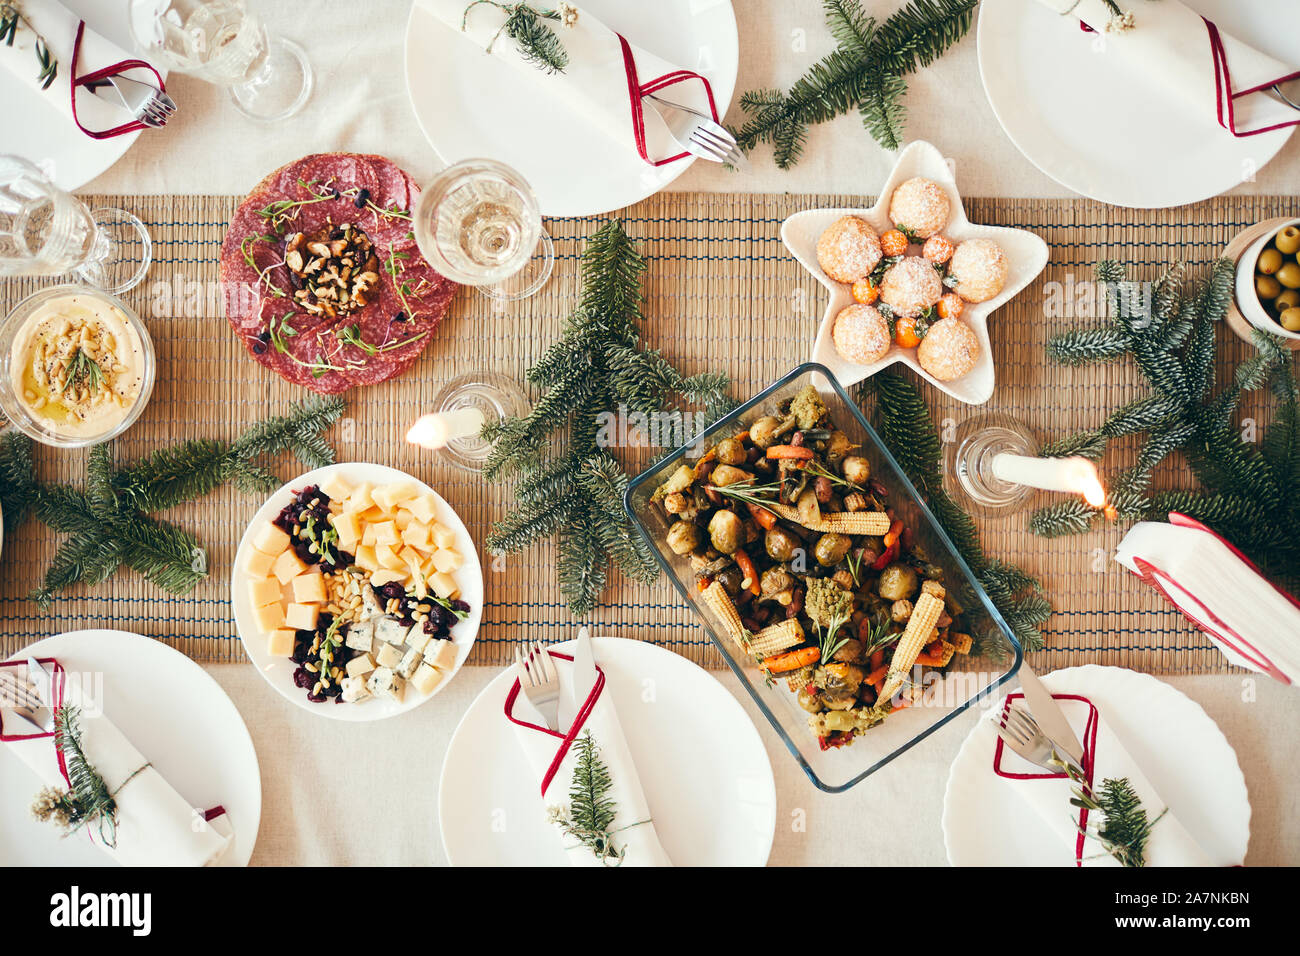 Top view background of cozy table setting decorated with fir branches for Christmas  banquet focus on delicious homemade food, copy space Stock Photo - Alamy